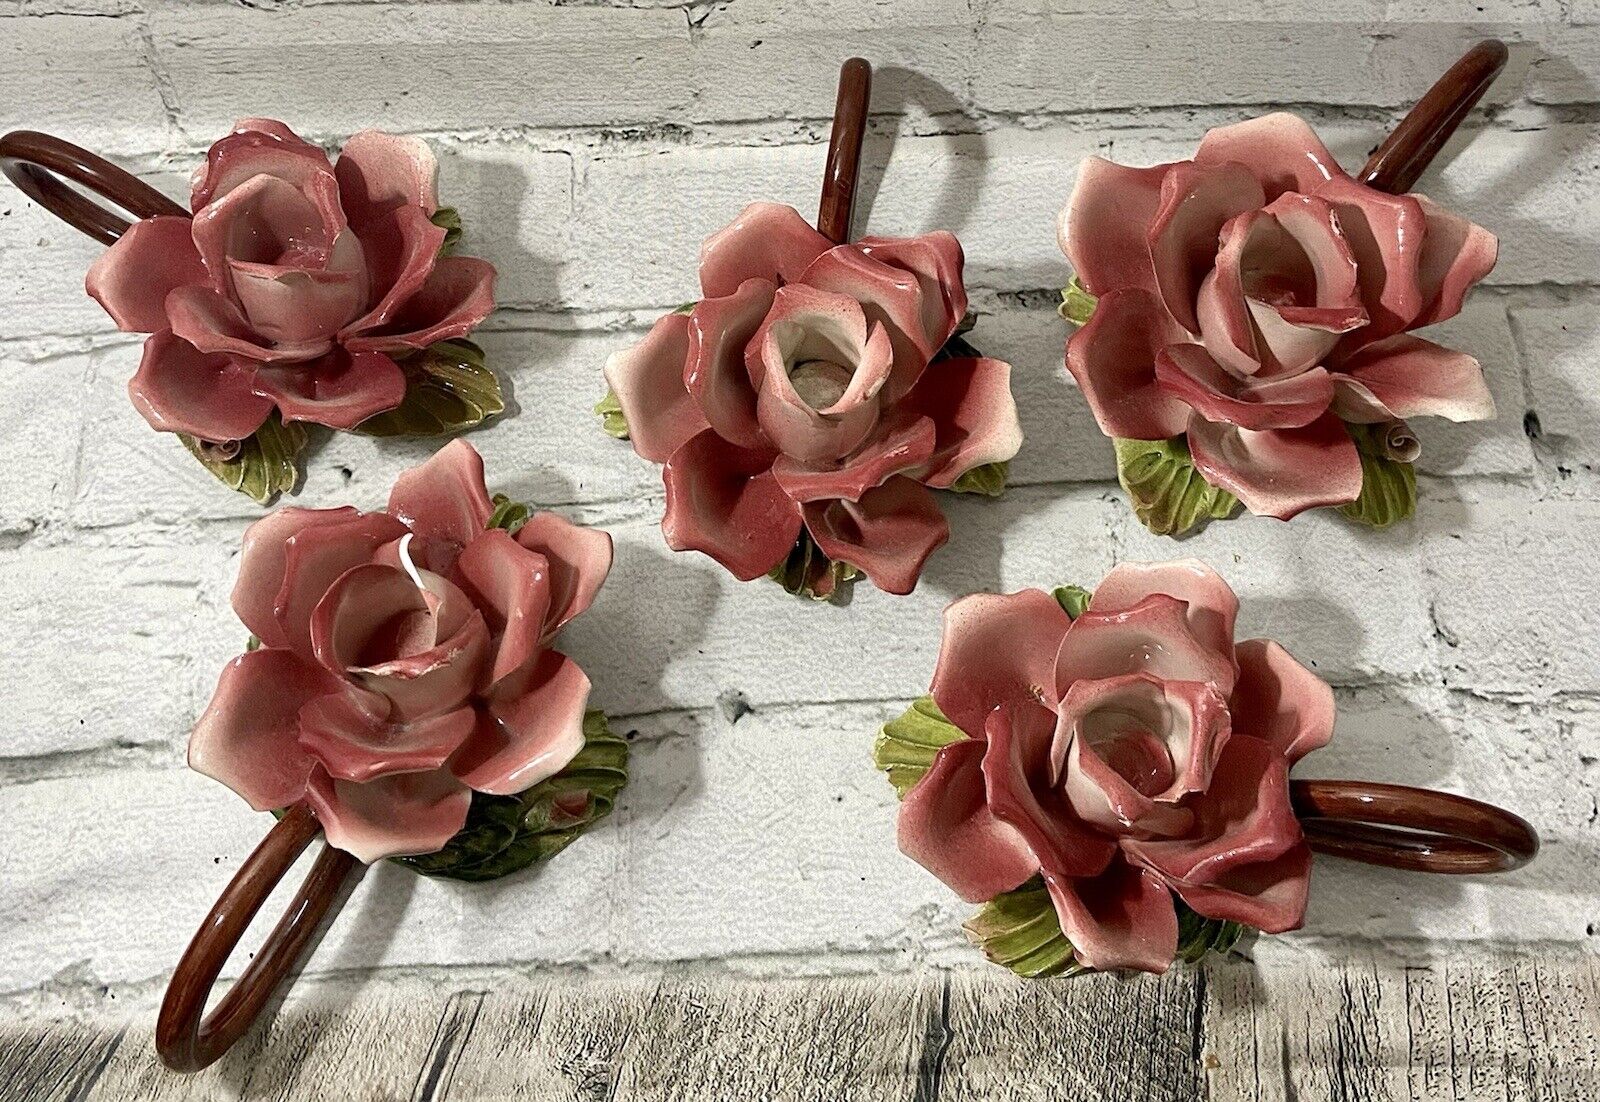 5 VTG Capodimonte Italy Porcelain Rose Candleholders Small Chips on Few Petals